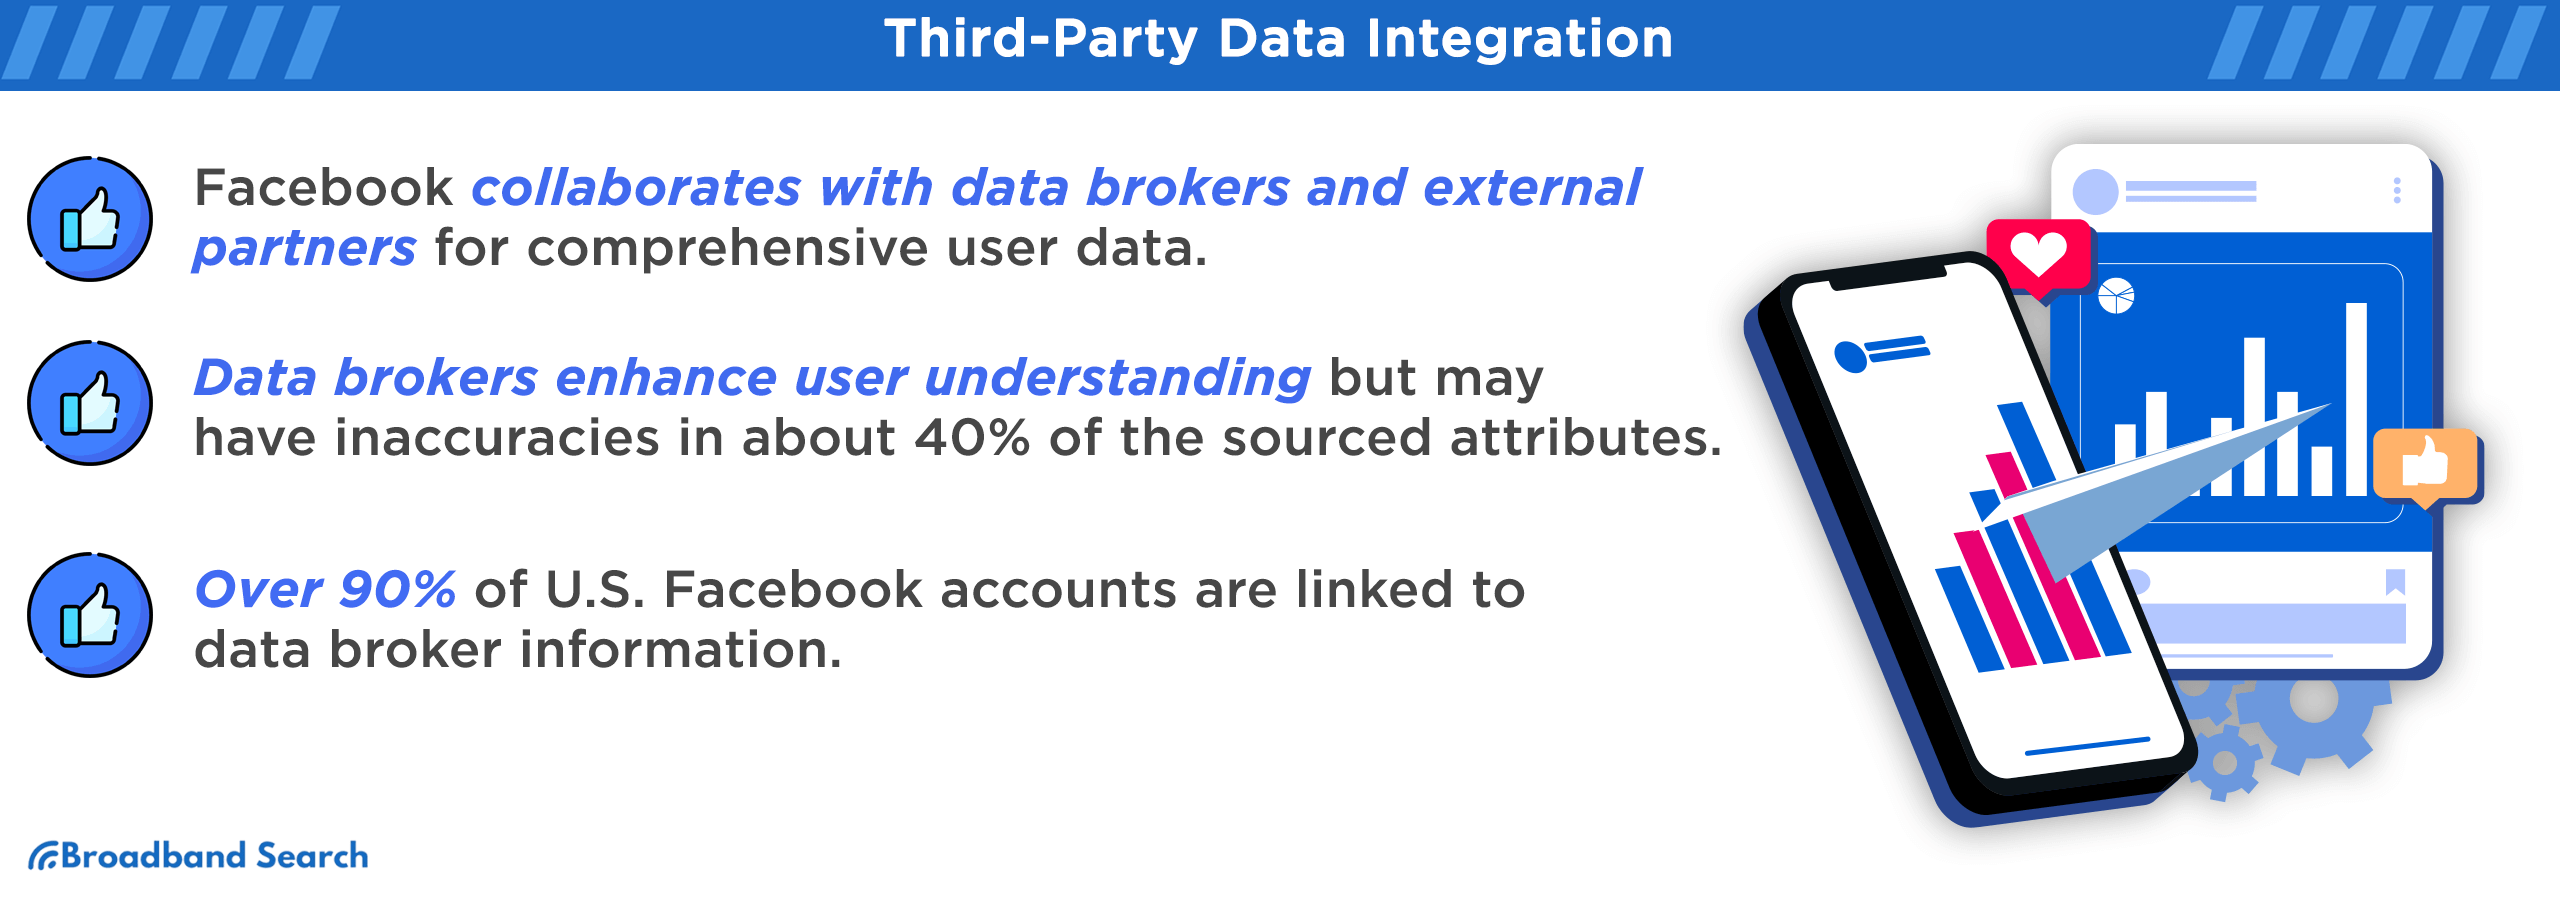 Third party data integration in facebook